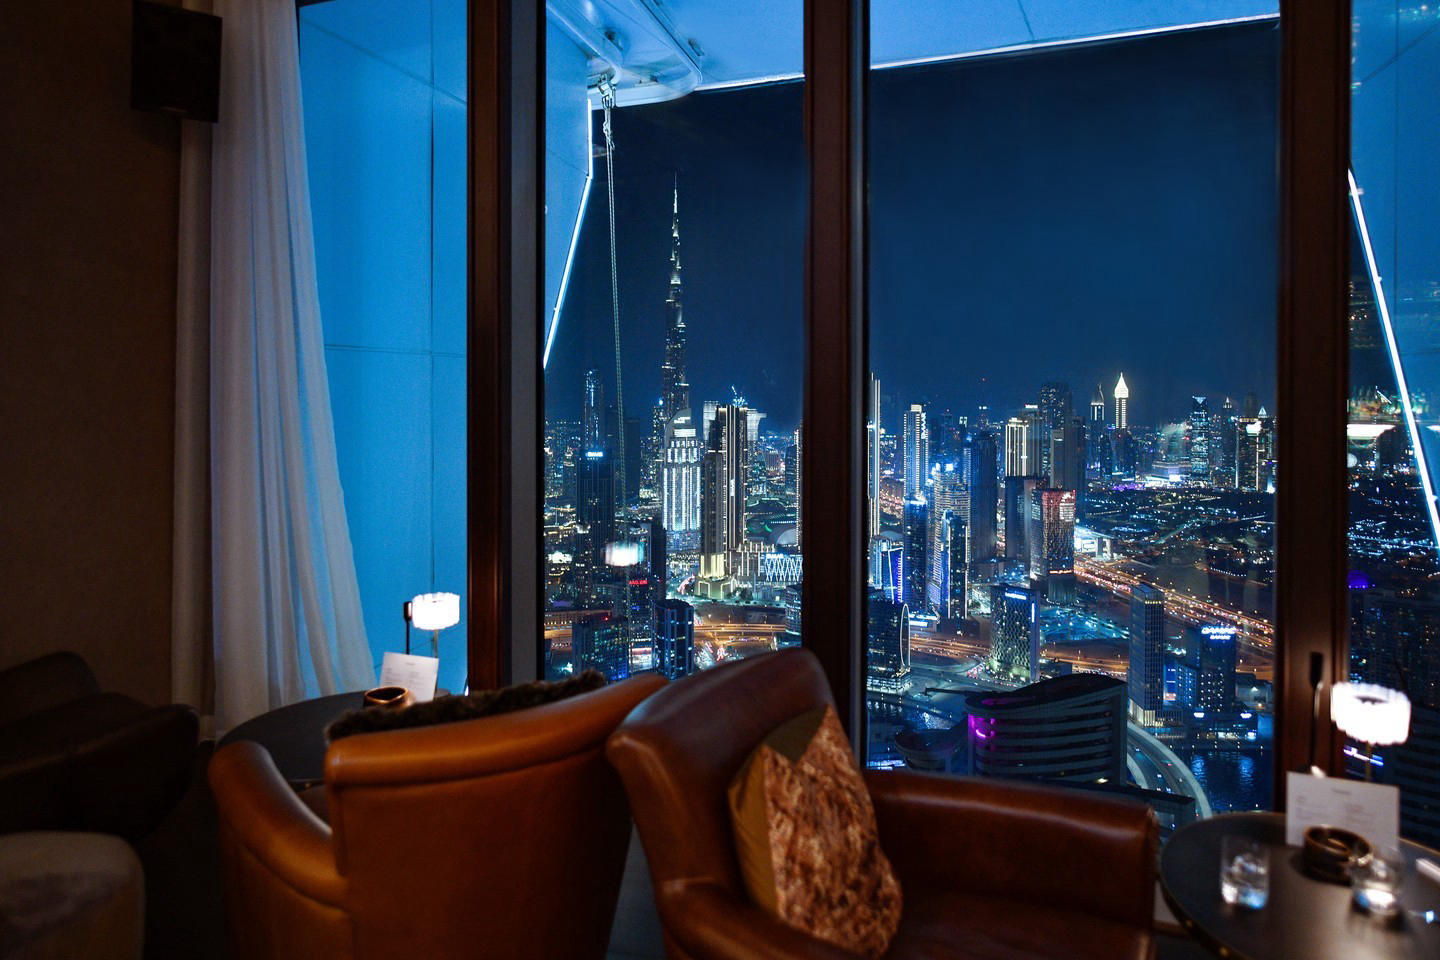 With unmatched views and a cozy seat above the clouds, #Smokeandmirrorsdubai will be your new and be